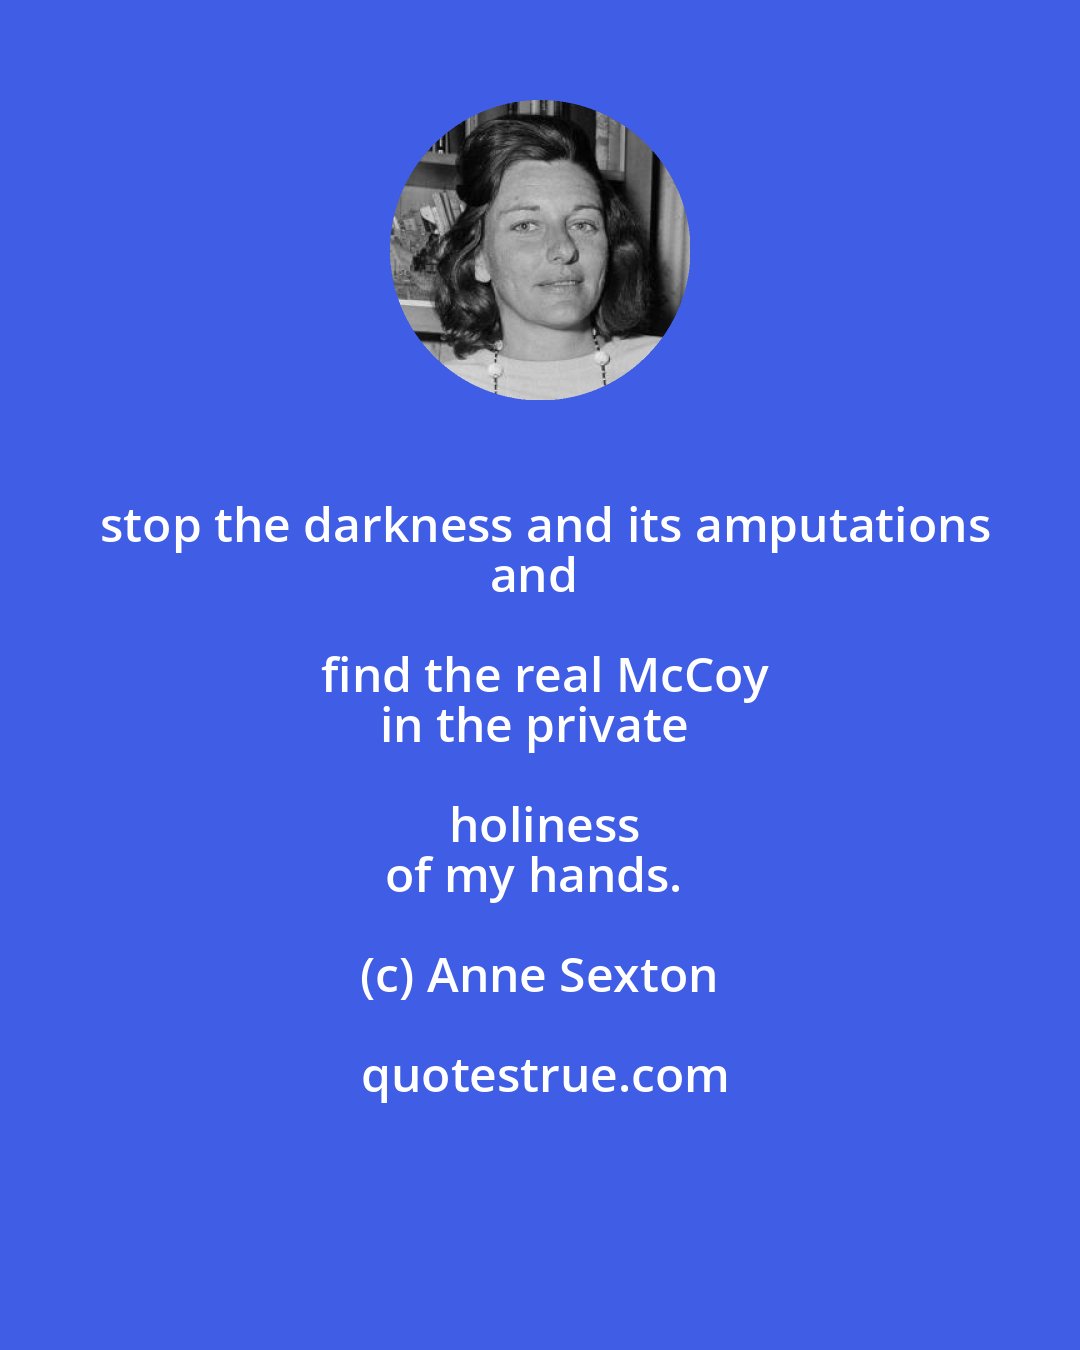 Anne Sexton: stop the darkness and its amputations
and find the real McCoy
in the private holiness
of my hands.